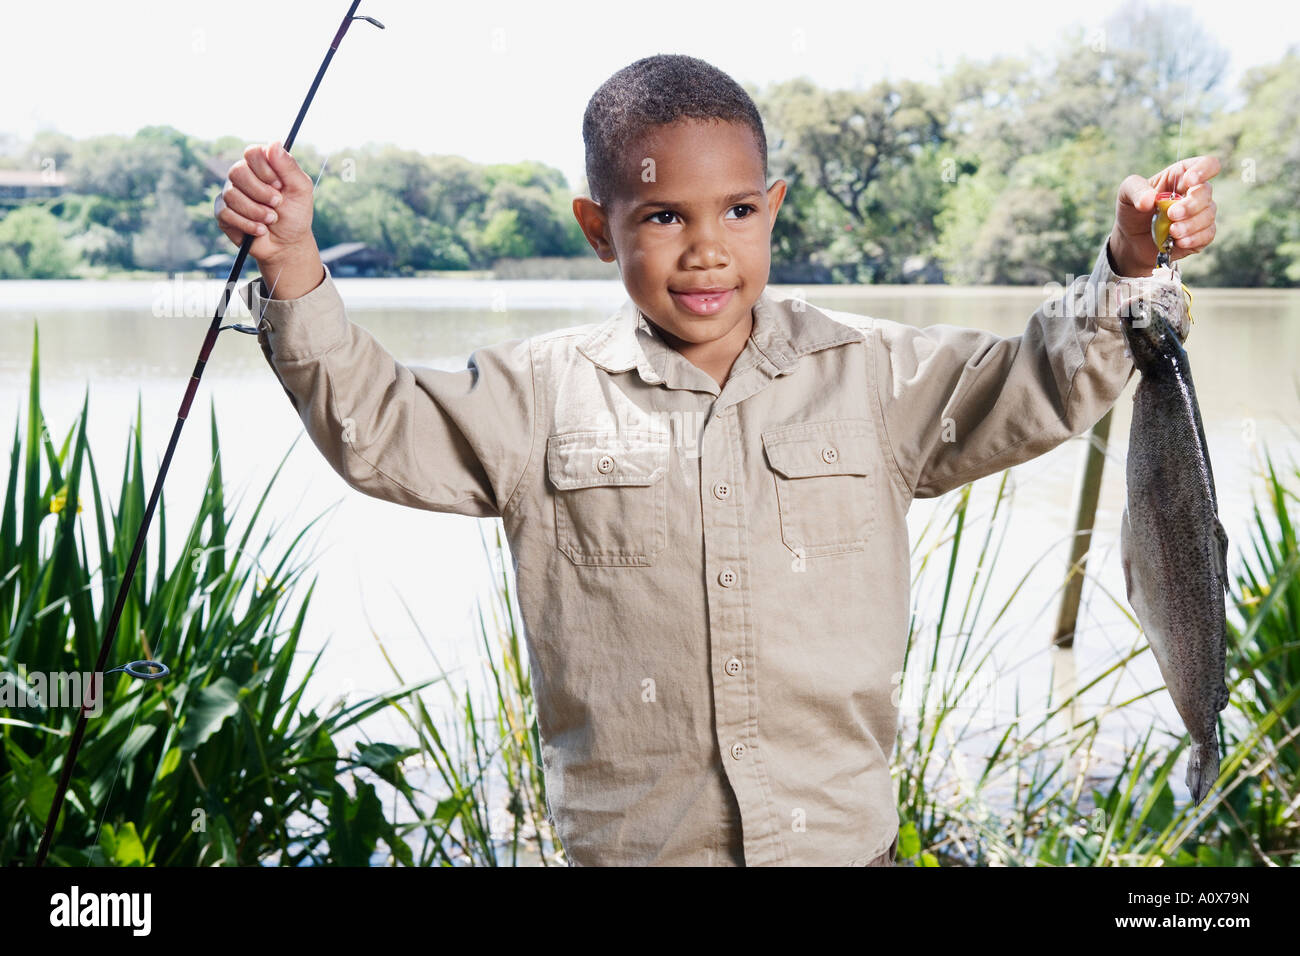 Young African boy with fishing pole and fish Stock Photo - Alamy